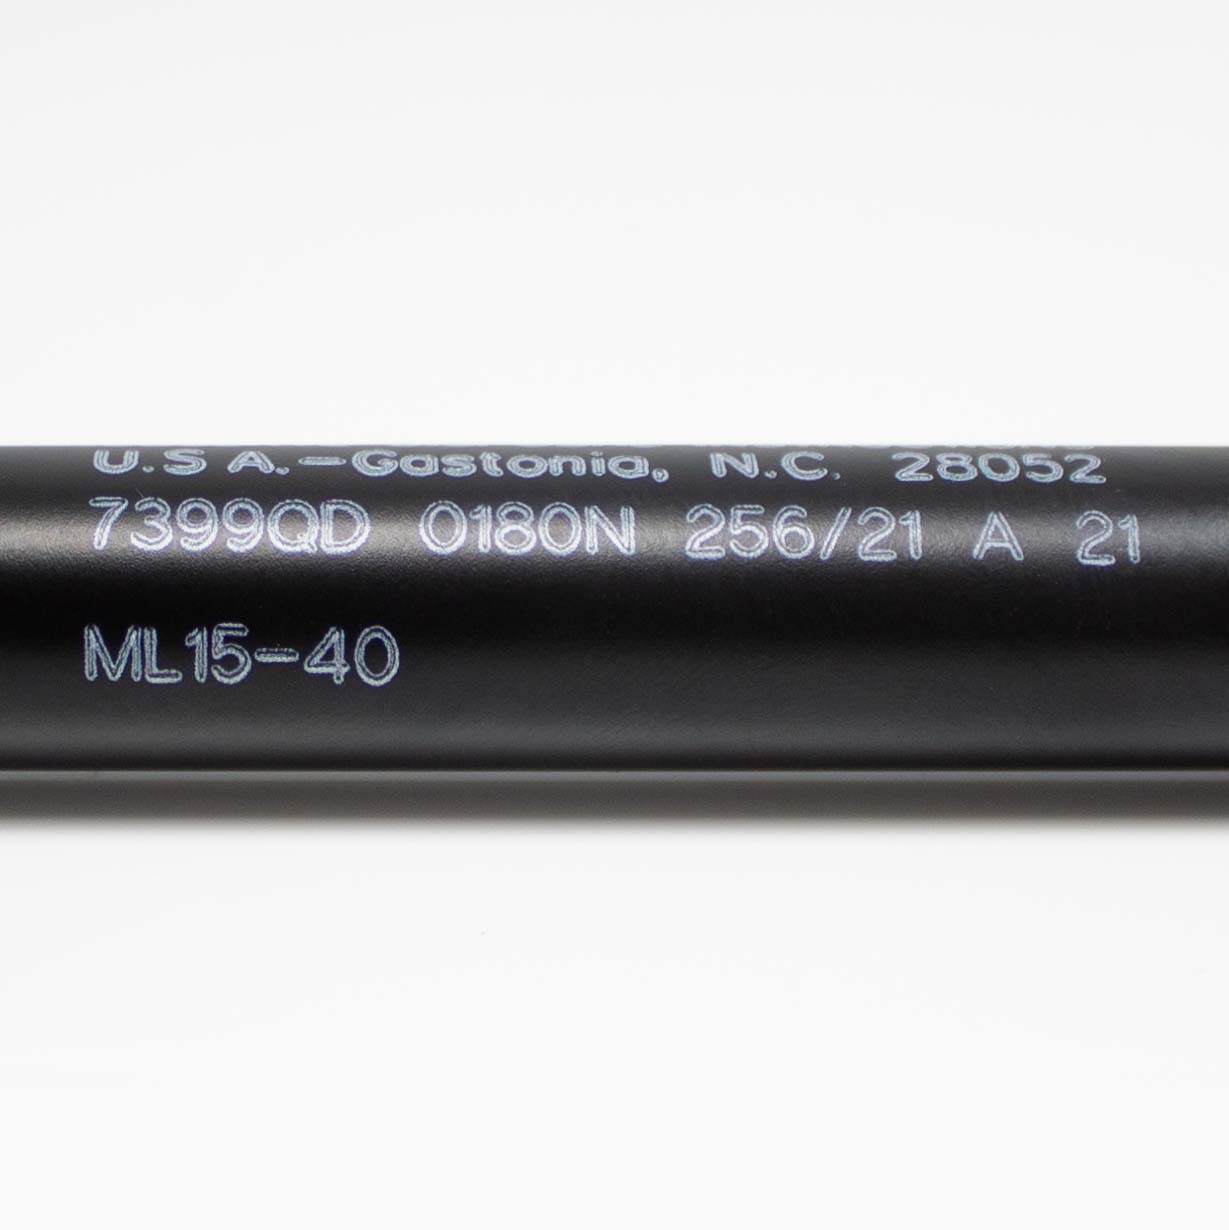 Future-Sales-Stabilus-Strut-ML-15-40-7399QD-Extended-Length-12-Compressed-8.5-Dimensions-6mm-rod-15mm-tube-Newton-0180N-Force-40-lbs-Accommodates-10mm-ball-socket-side